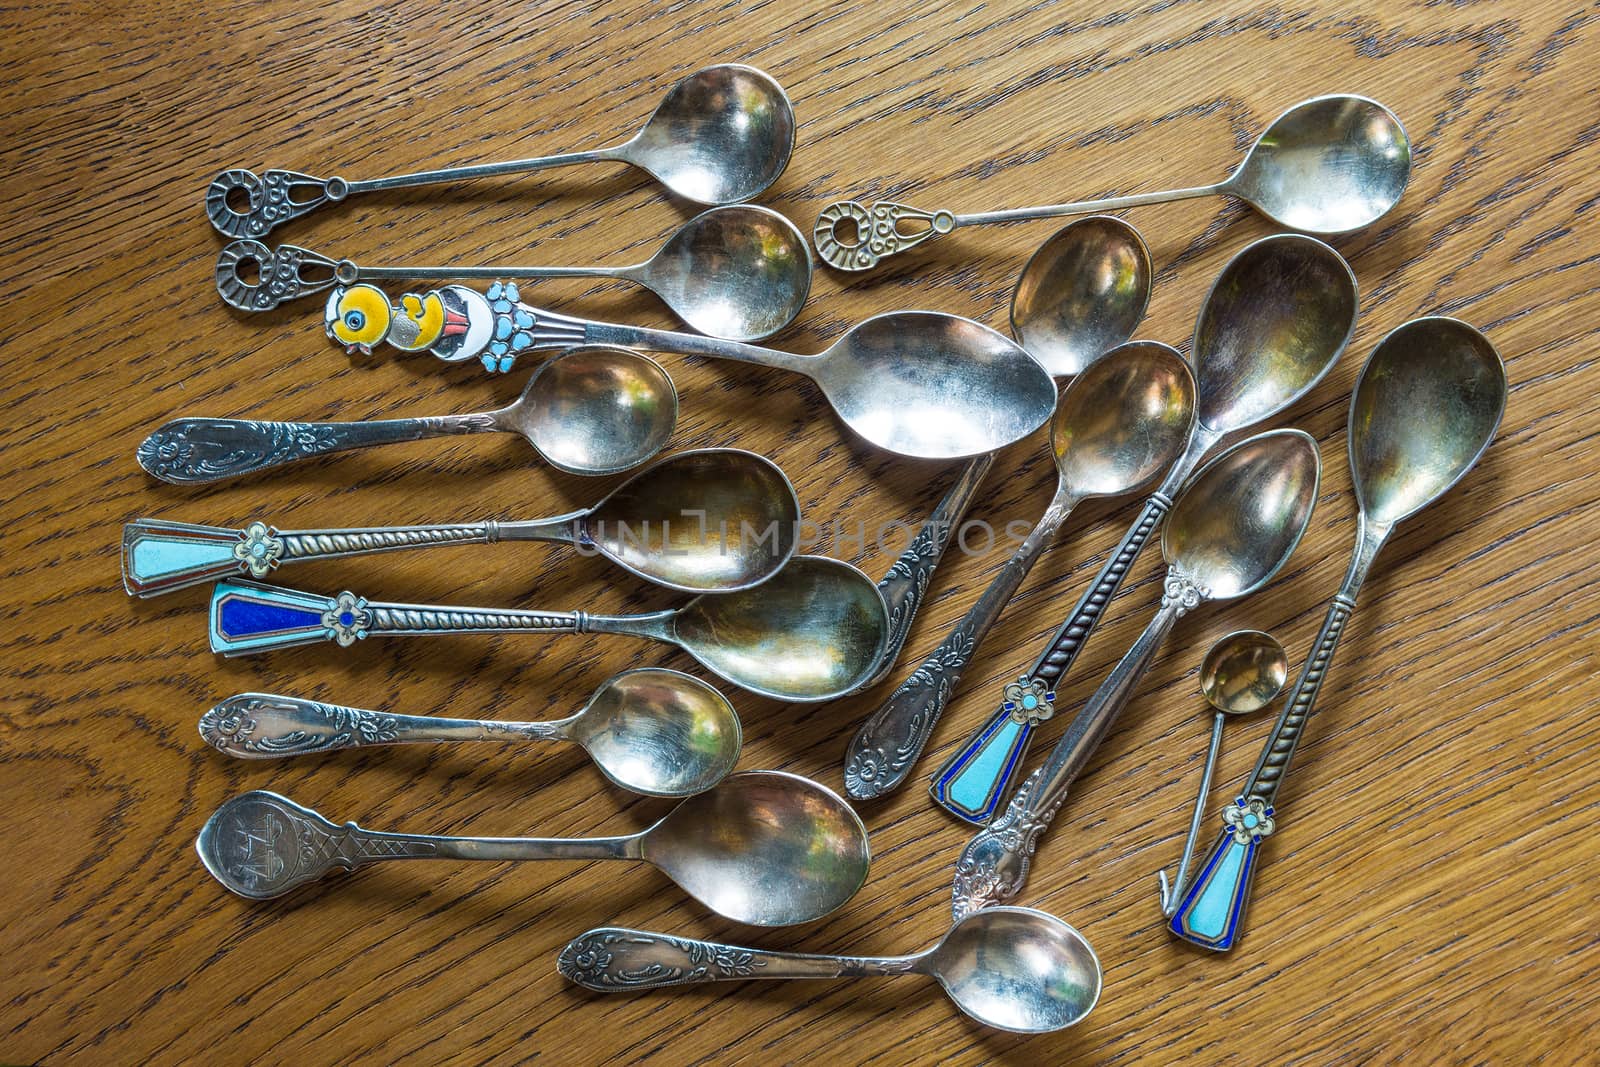 A pile of vintage, decorative spoons on an oak table by ben44